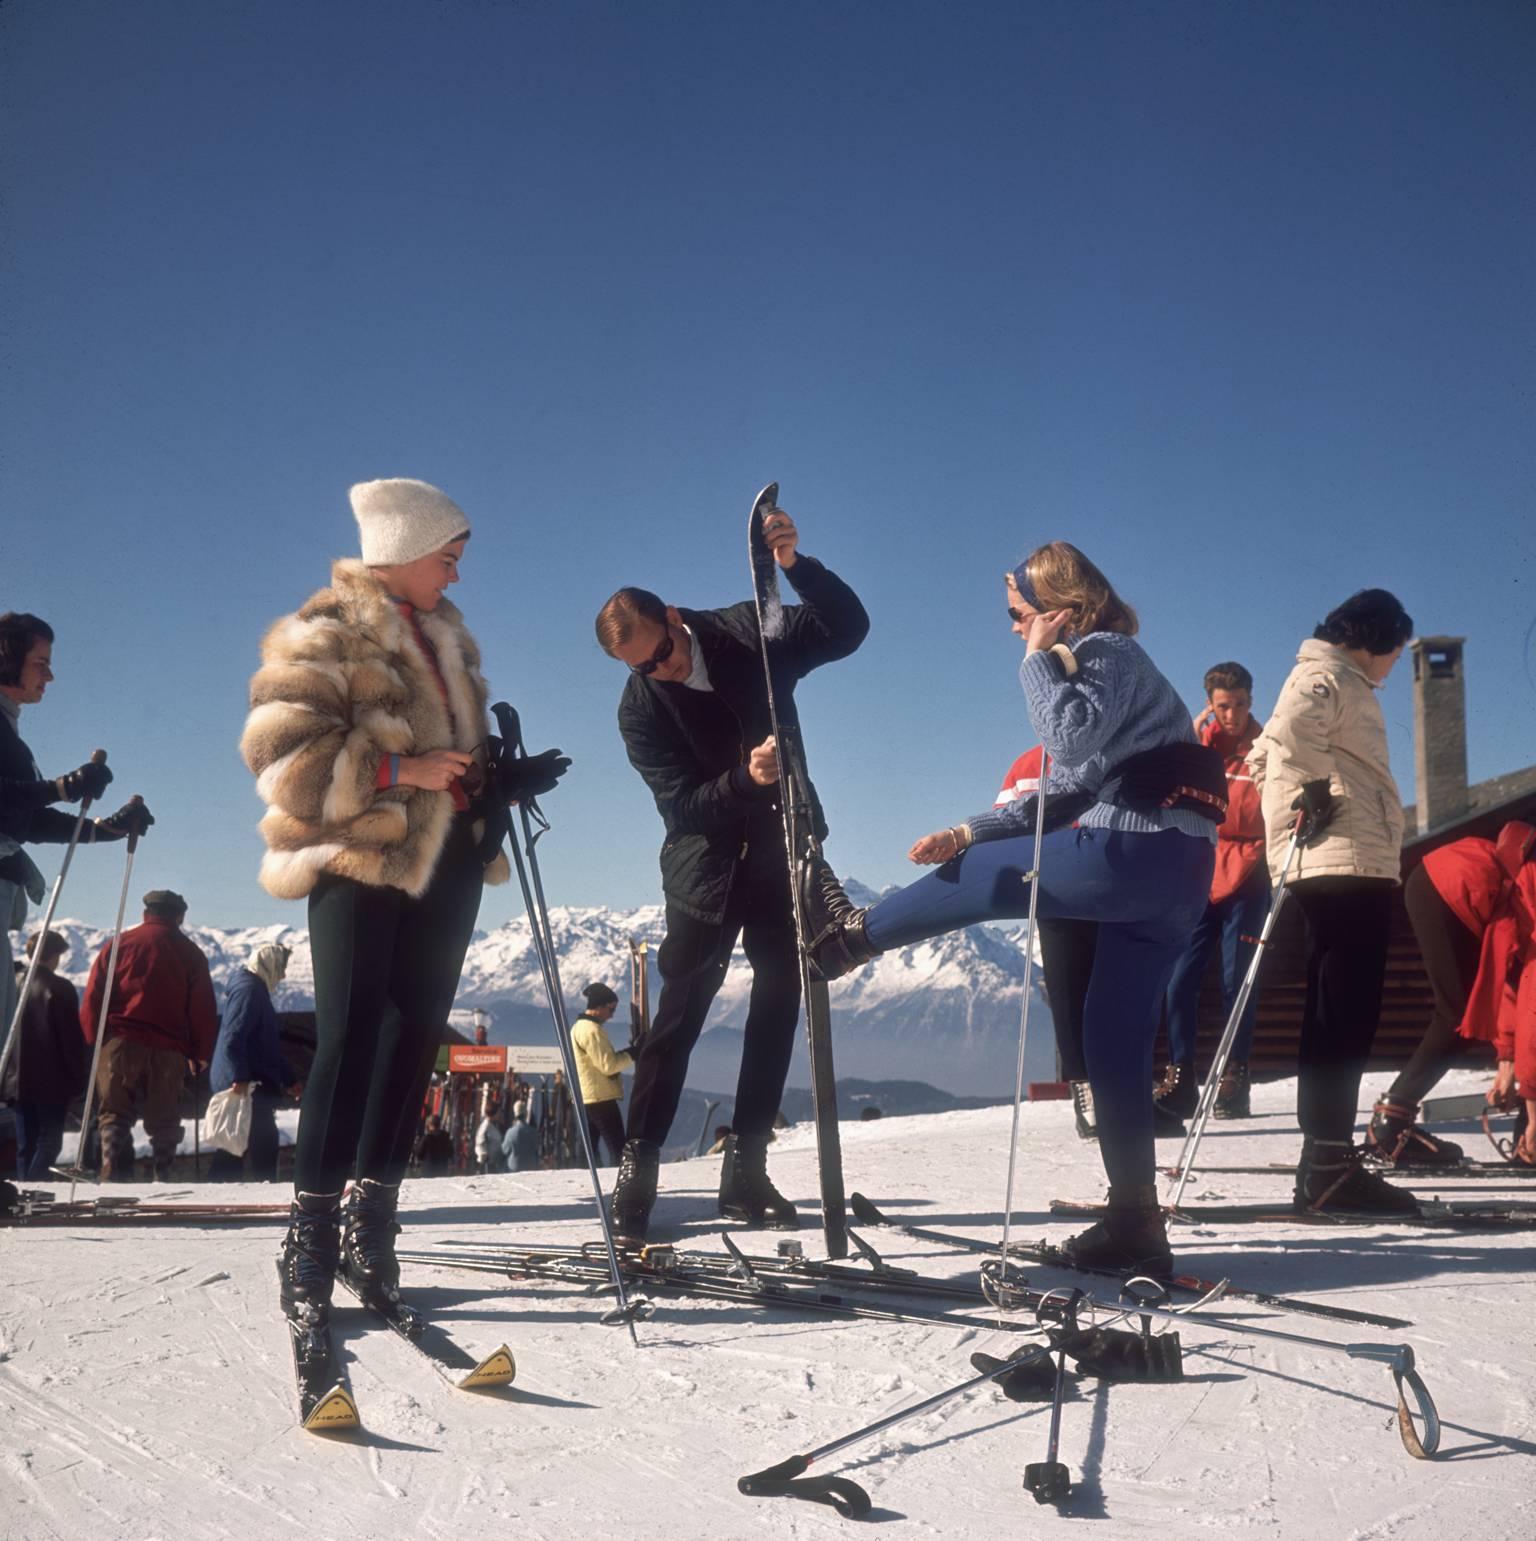 'Verbier Skiers' by Slim Aarons

Skiers at Verbier, 1964. 

Stylish skiers dressed in fashionable ski wear including a young woman who wears a fur jacket adjust skis and prepare for a day on the beautiful slopes, against a backdrop of gorgeous